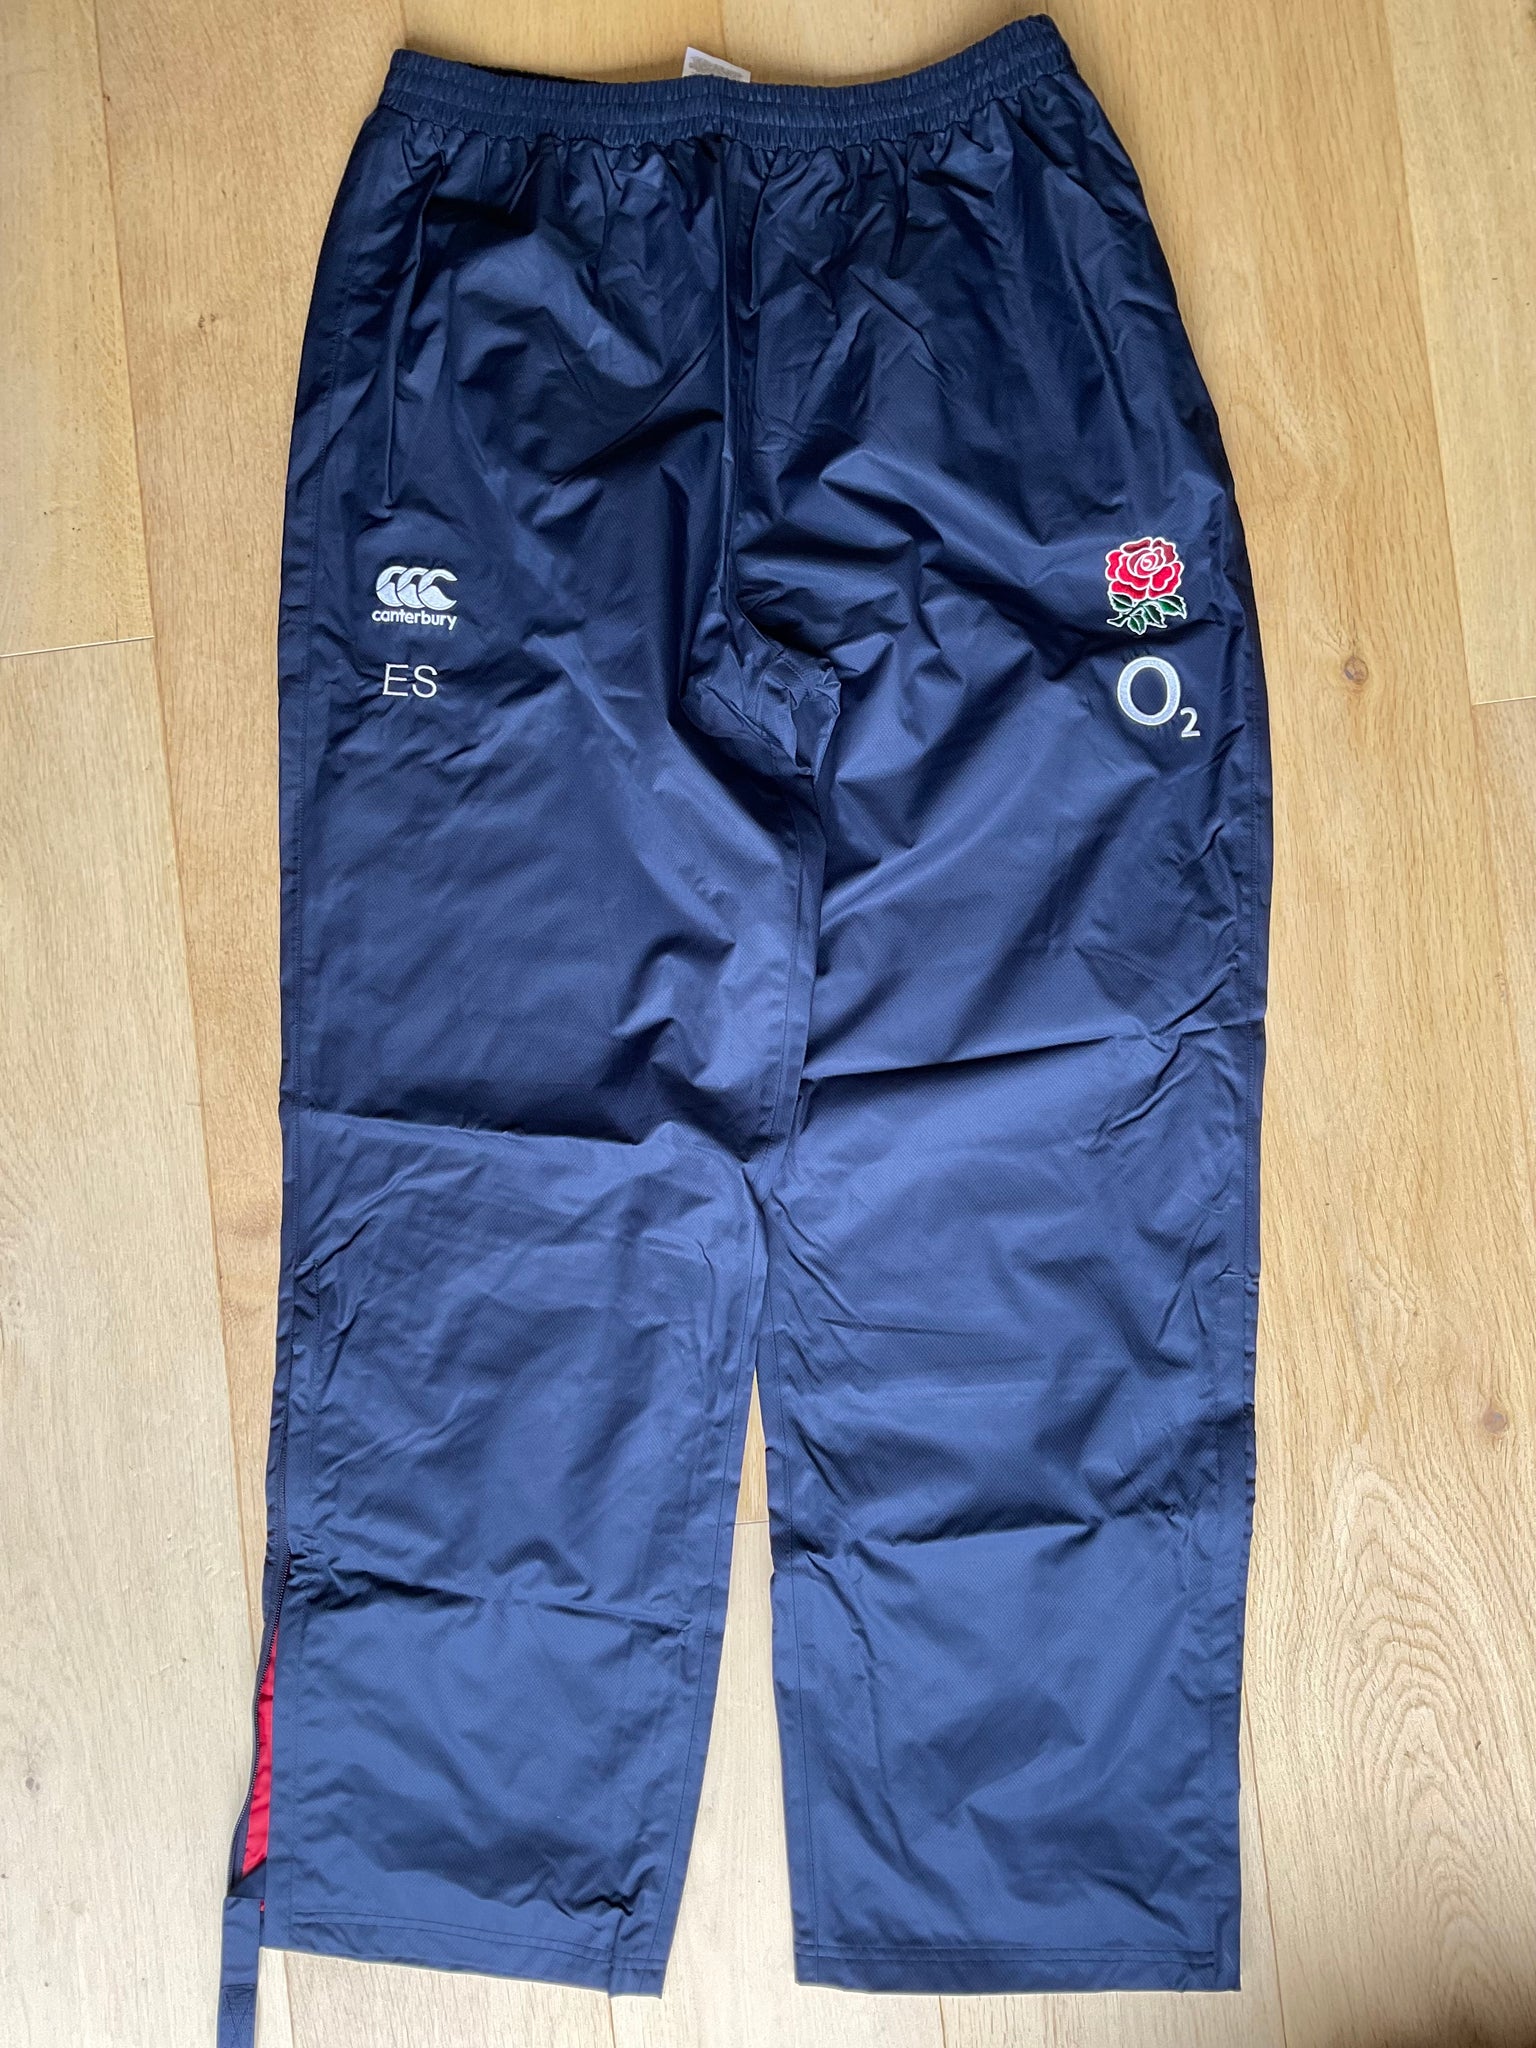 Ed Slater - England Rugby Contact Pants [Blue]